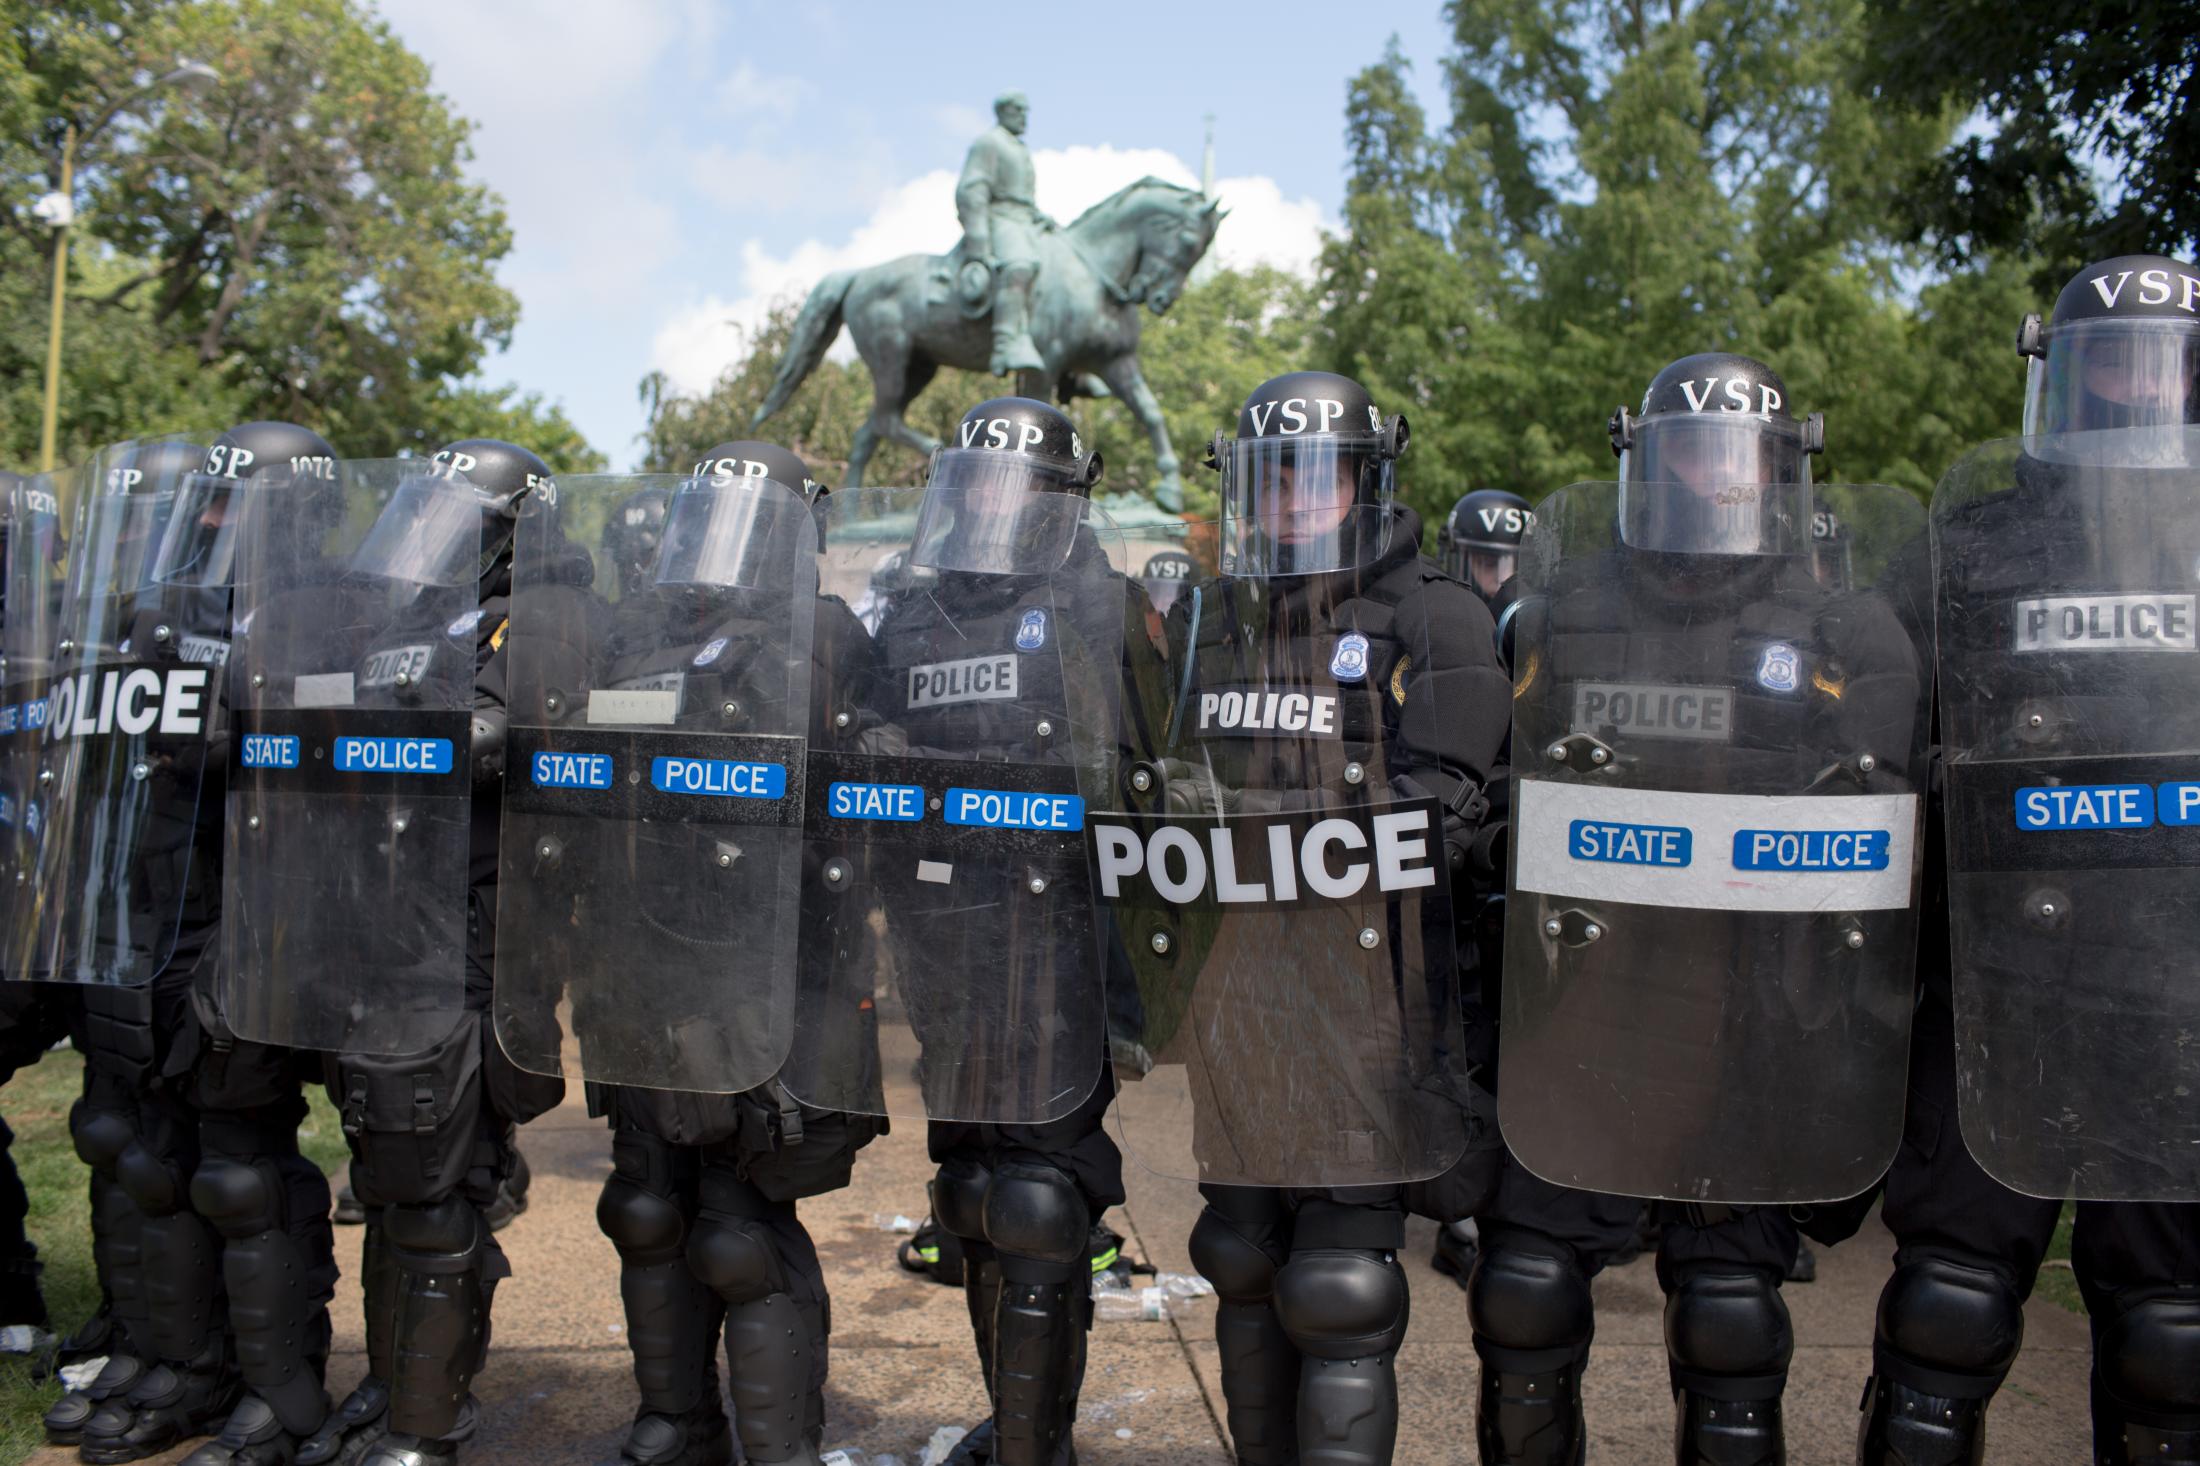 Charlottesville - Virginia State Police in riot gear form a line in front...